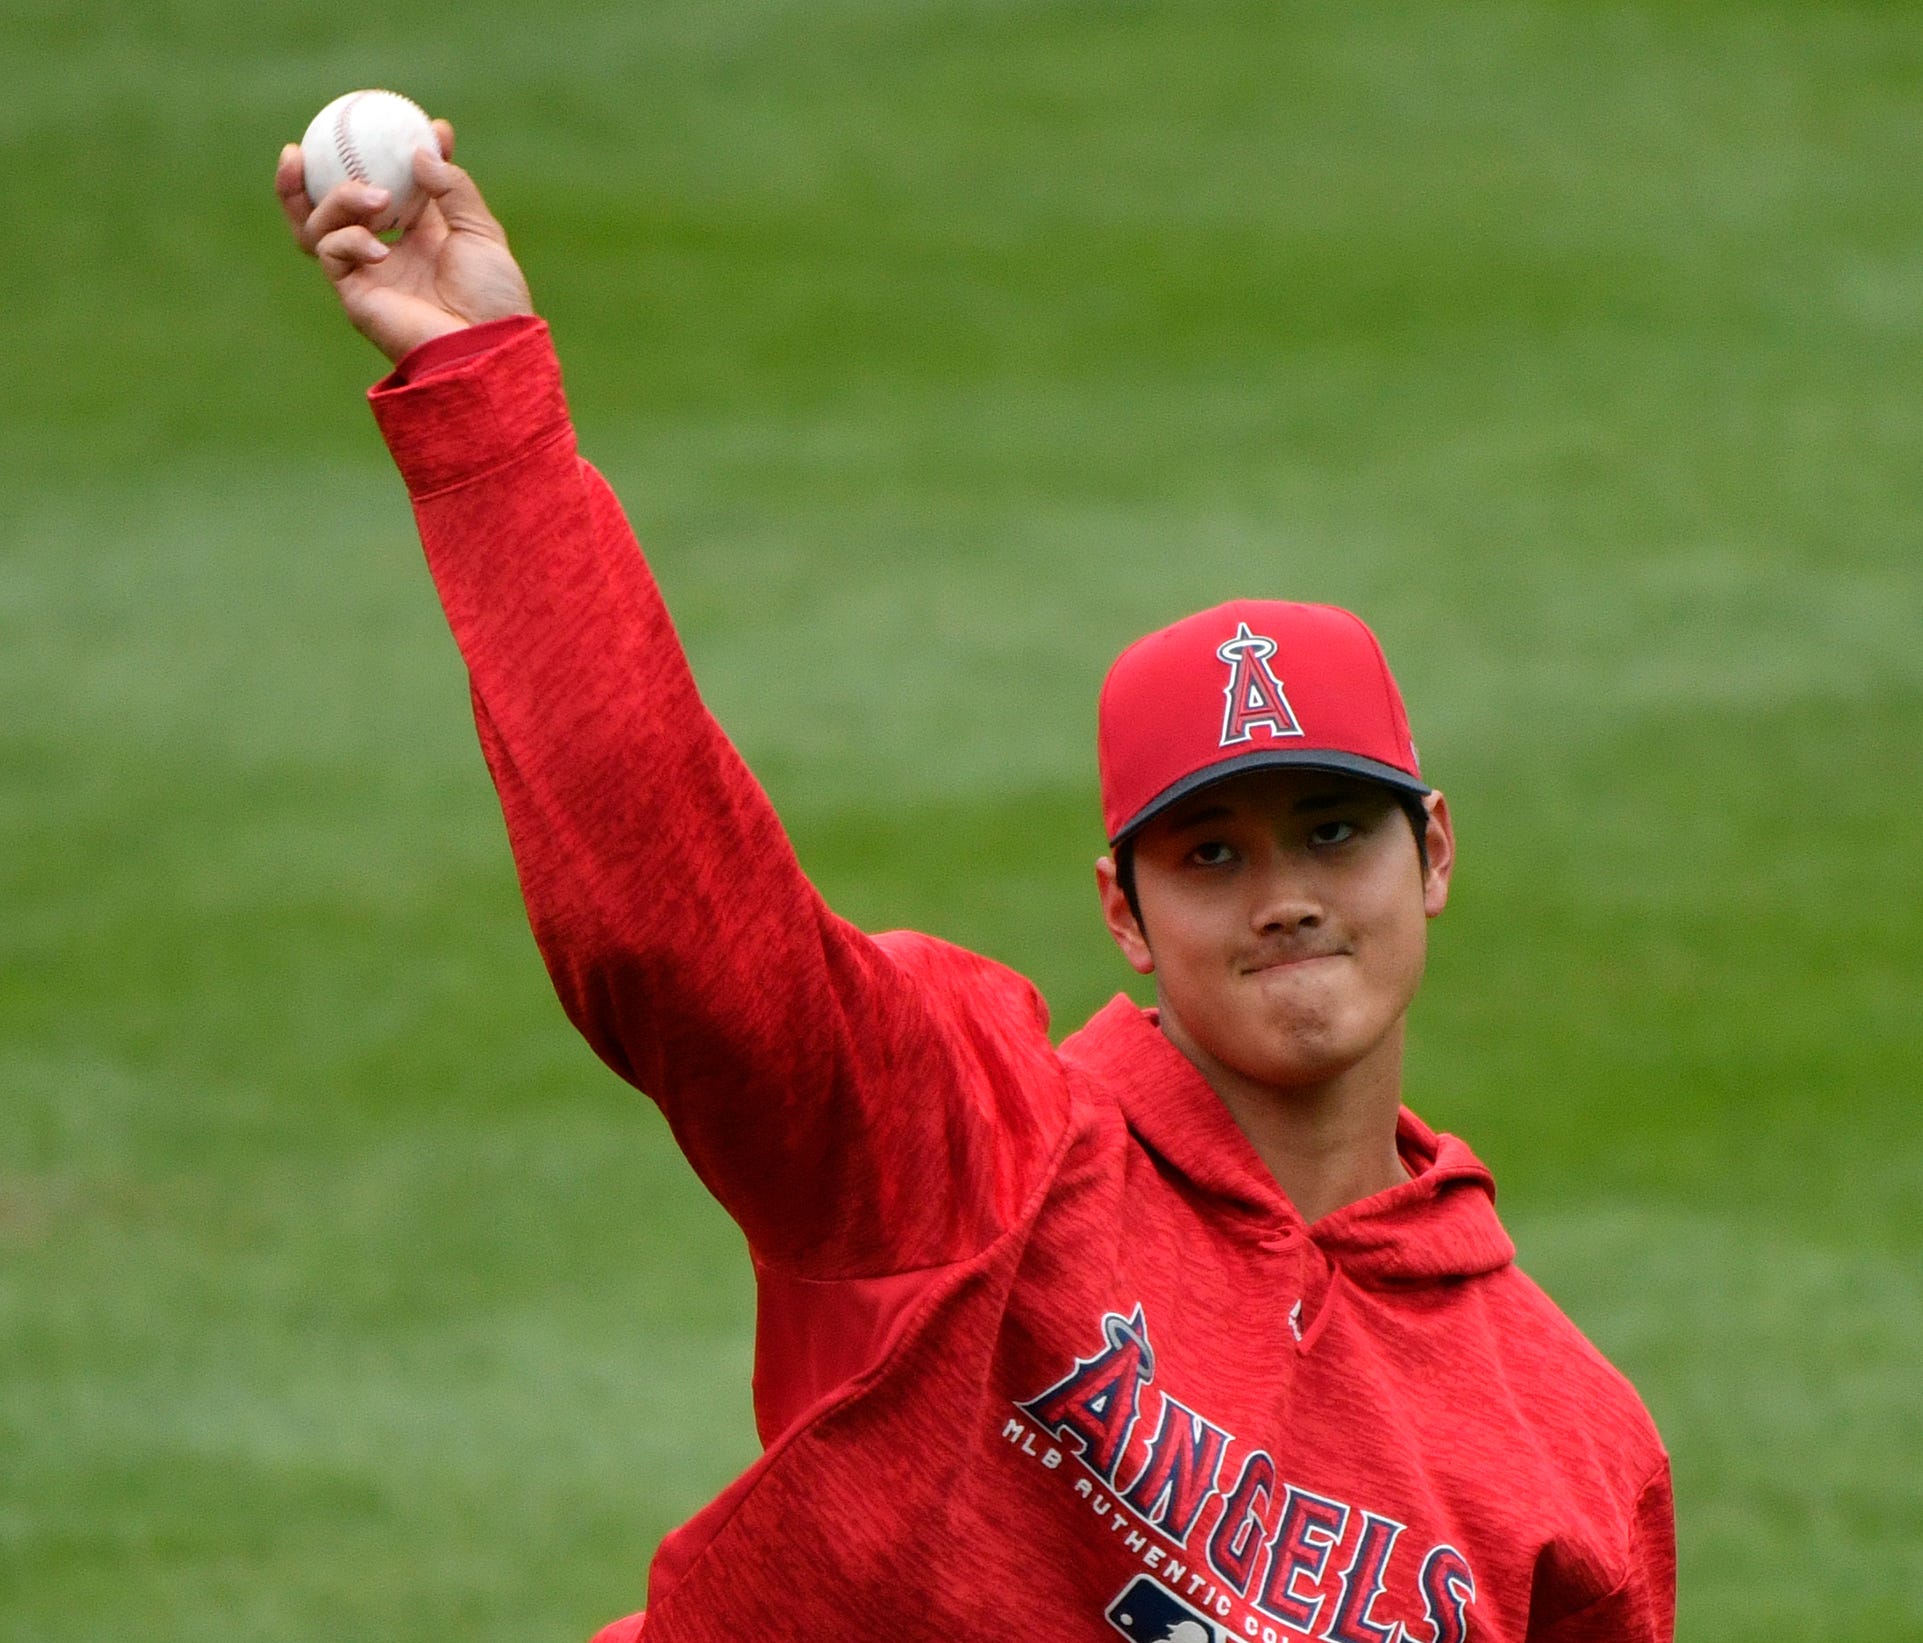 Shohei Ohtani is making batters swing and miss at a dizzying rate.